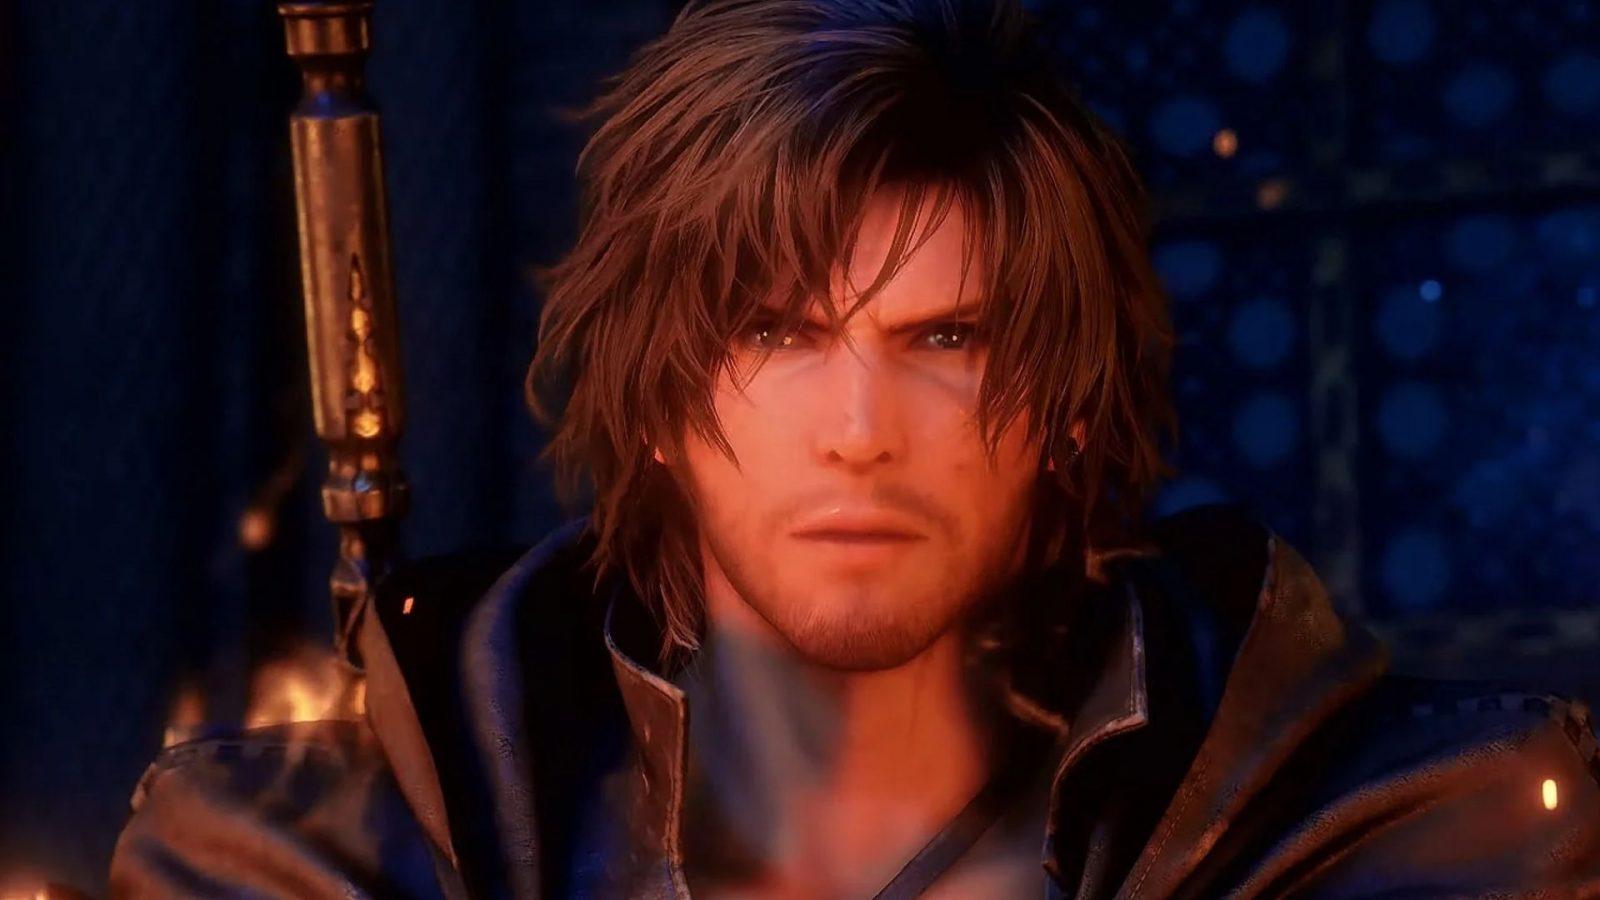 Final Fantasy 16 is the new victim of the review bombing on